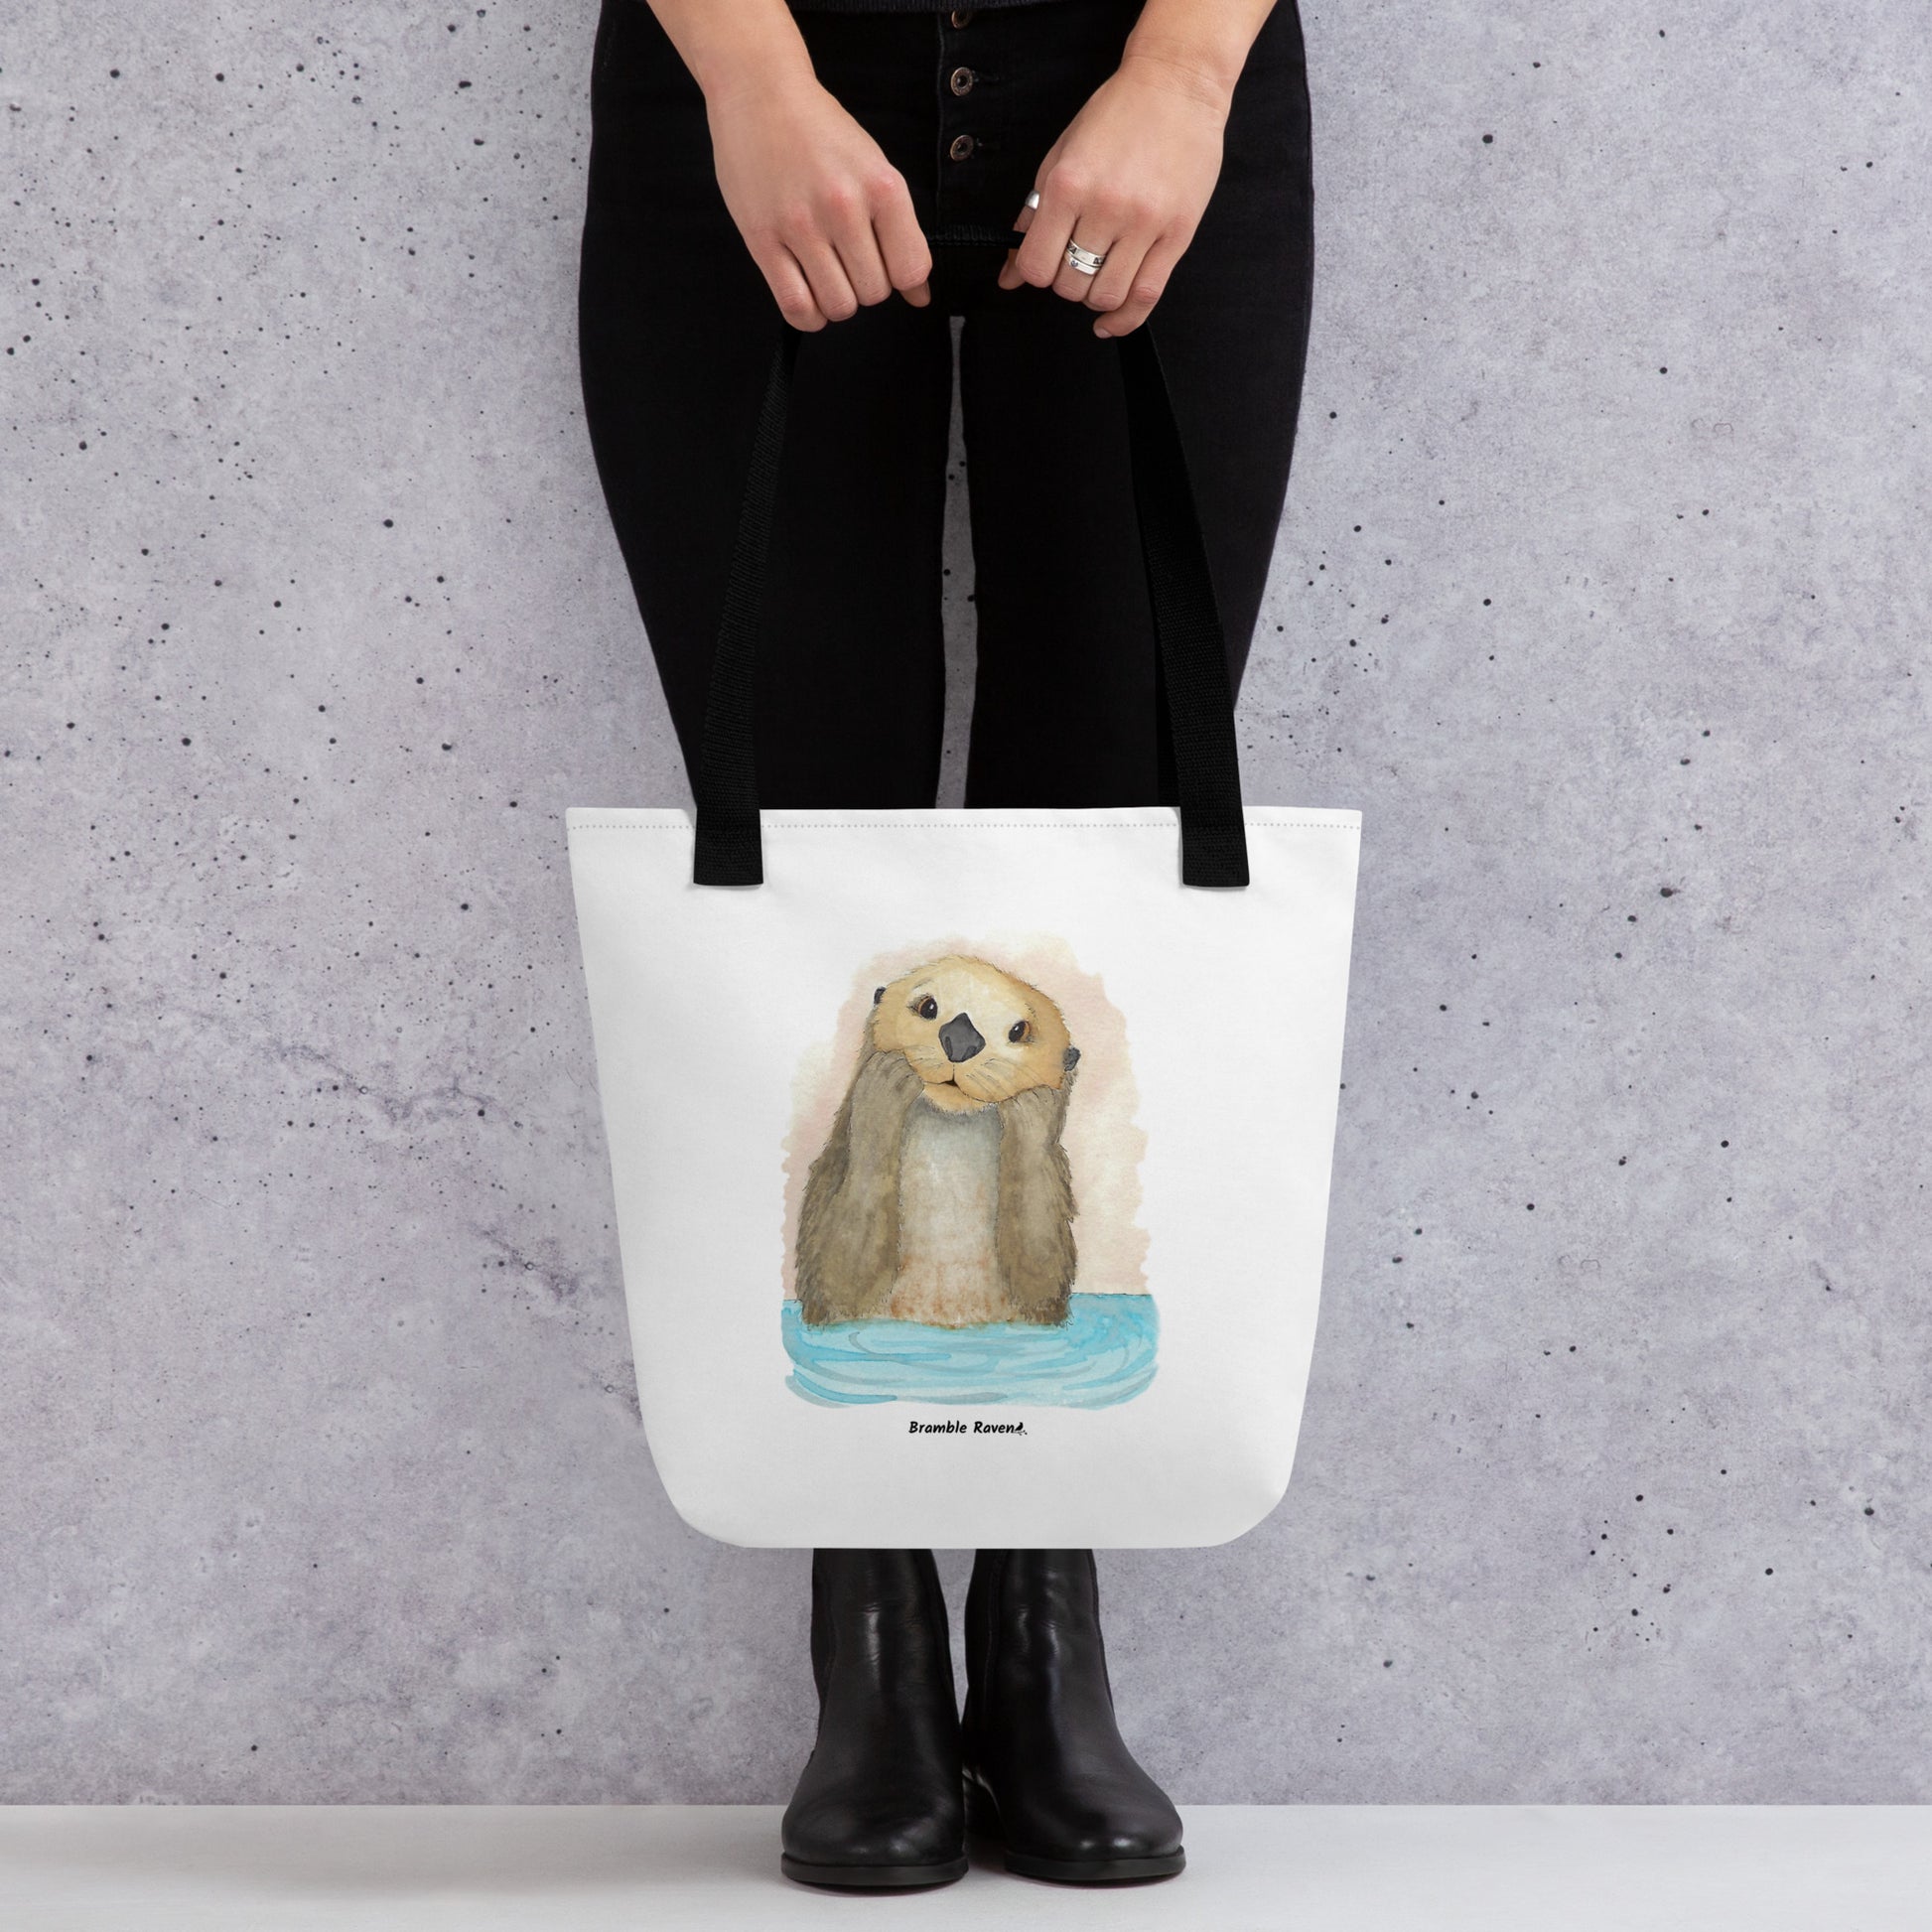 Otter Amazement sturdy tote bag. Measures 15" by 15" and can hold up to 44 lbs. Features watercolor sea otter painting printed on front and back. Has black handles. Shown hanging from model's hands.